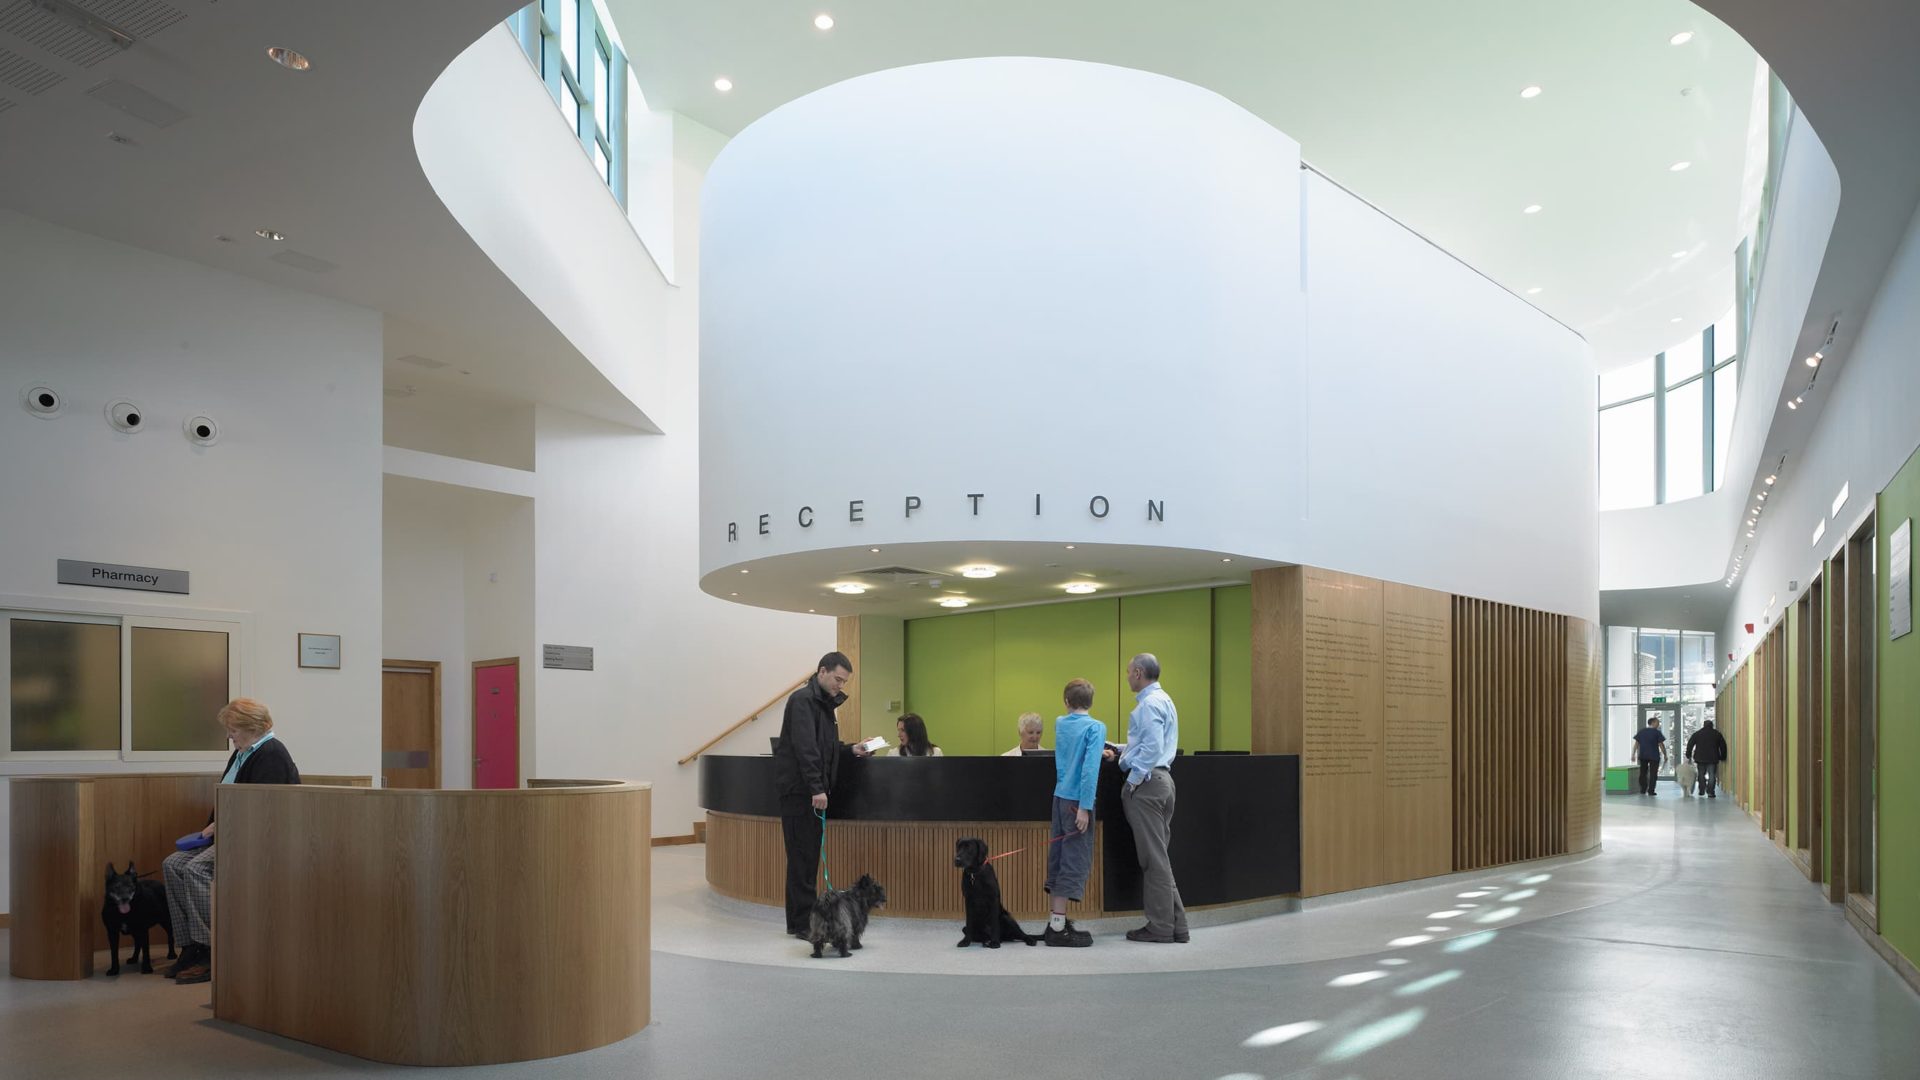 reception area in small animal hospital in the university of glasgow